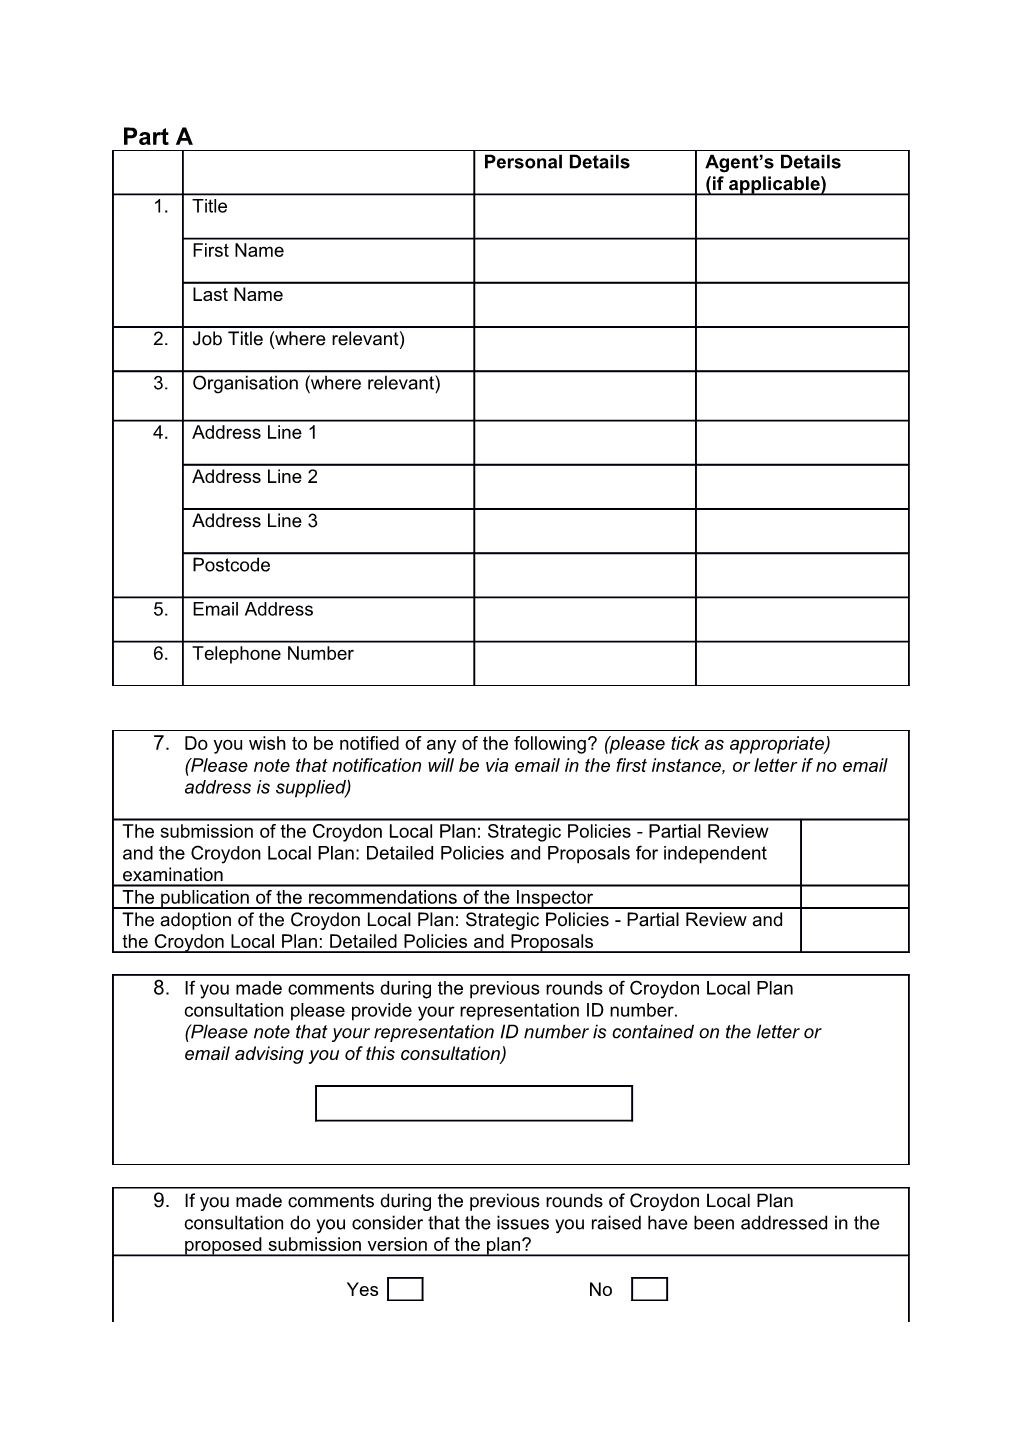 Please Refer to the Representation Form Guidance Note When Completing This Form